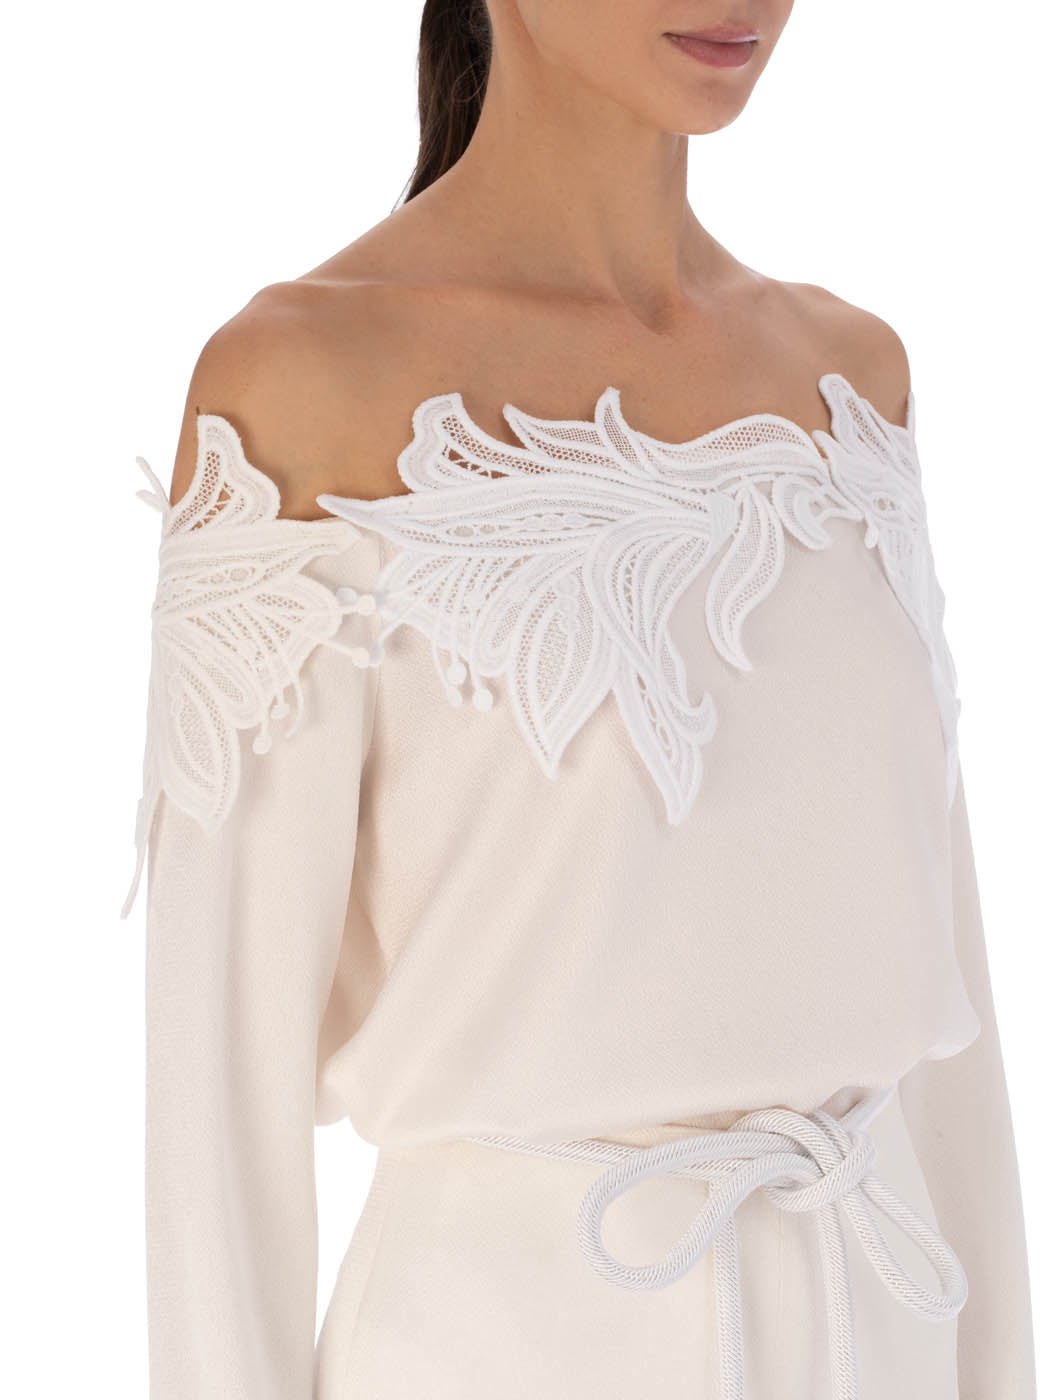 Belinda Blouse White with ornate Guipure lace detailing on the shoulders and cut-out accents, displayed on a plain background.